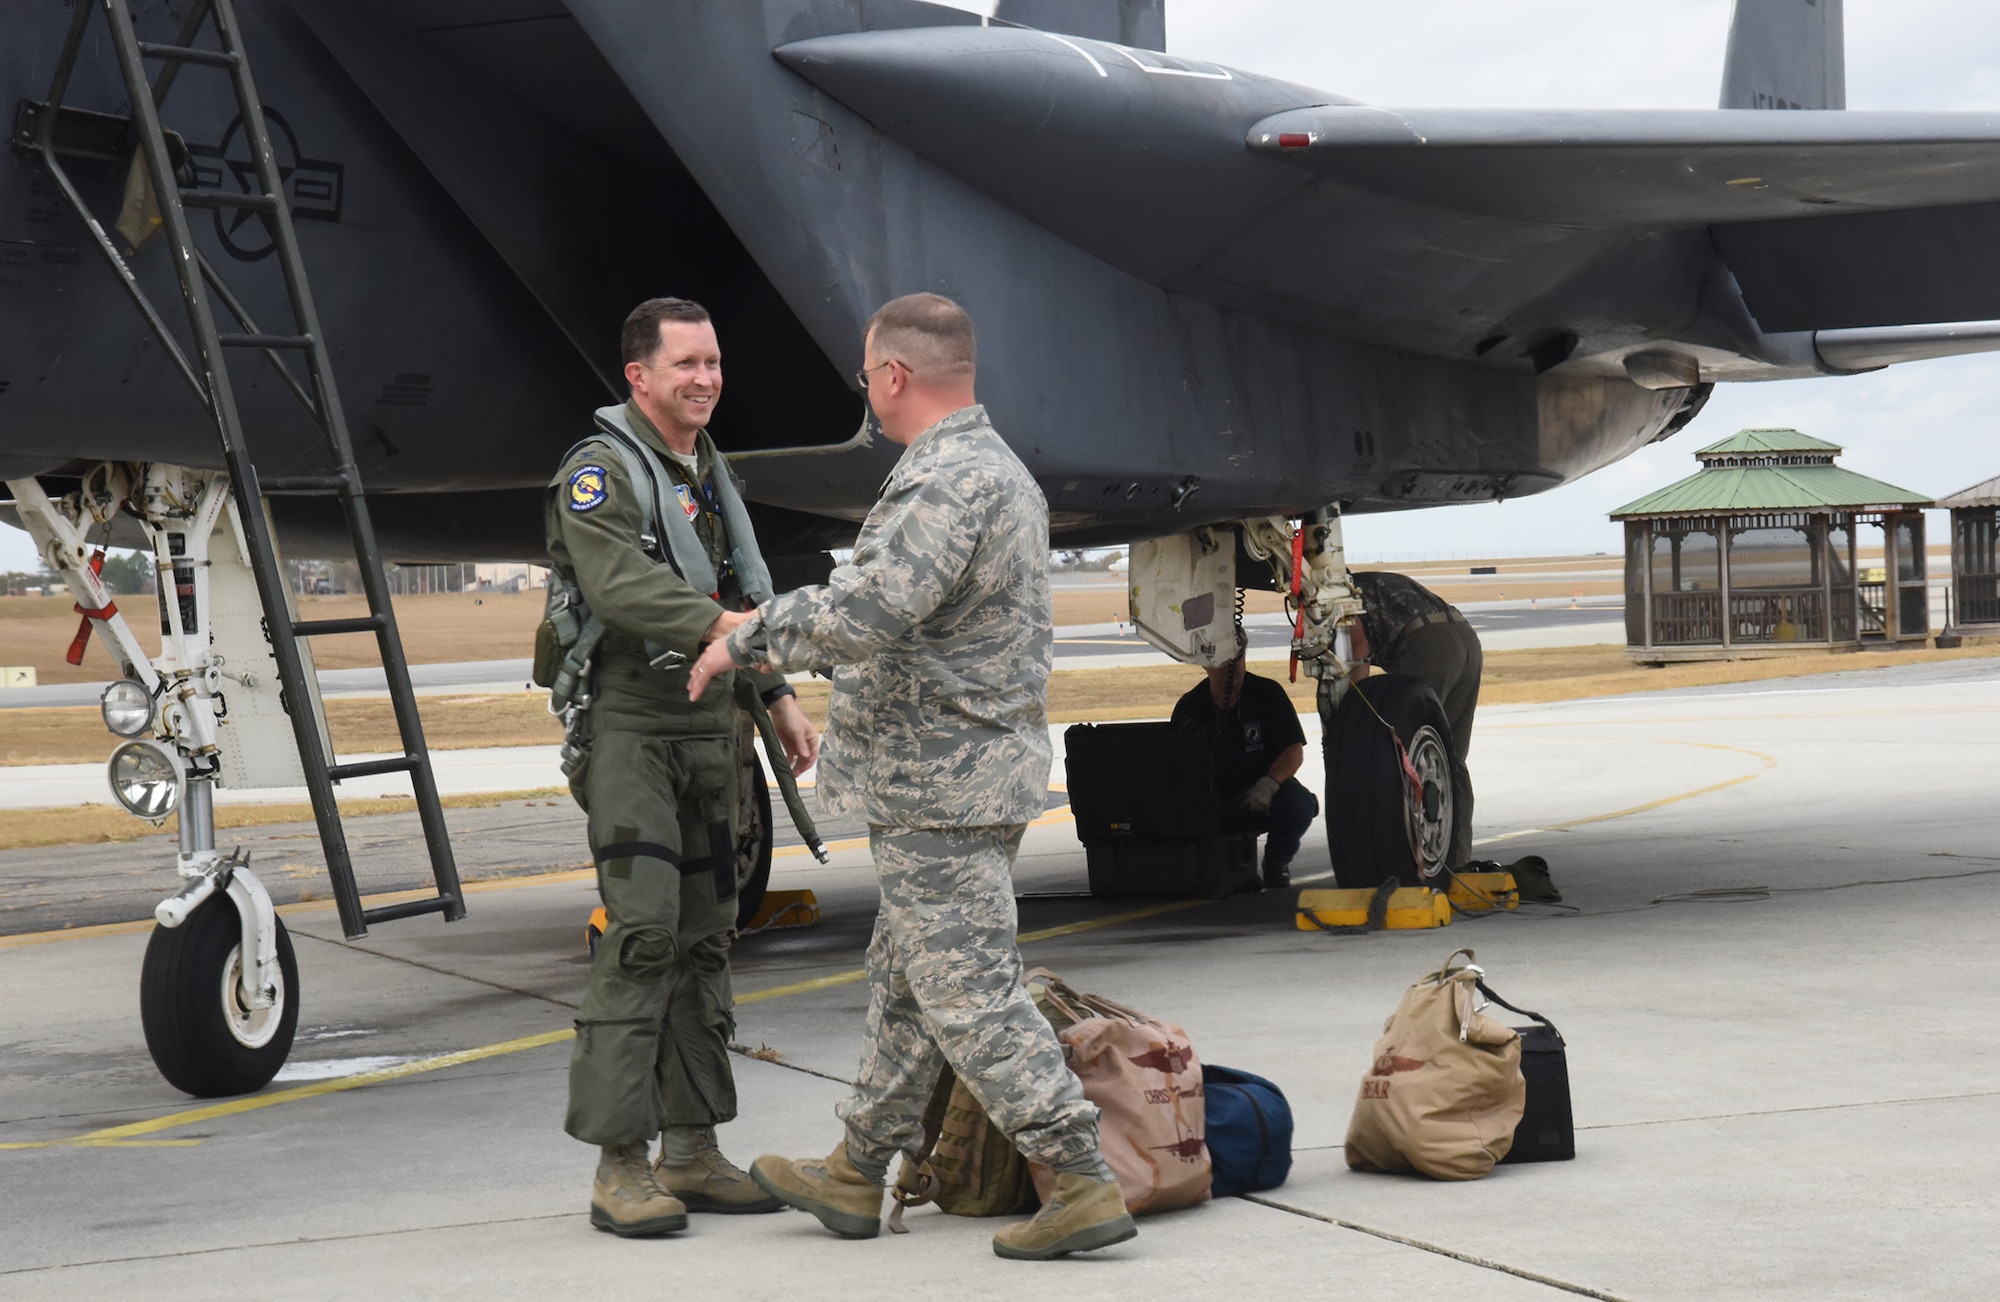 Brig. Gen. John Kubinec, Warner Robins Air Logistics Complex commander, greets Col. Christopher Sage, 4th Fighter Wing commander, following Sage's flight from Seymour Johnson Air Force Base, North Carolina. The F-15 Strike Eagle is at Robins Air Force Base for Programmed Depot Maintenance. (U.S. Air Force photo by Ed Aspera)